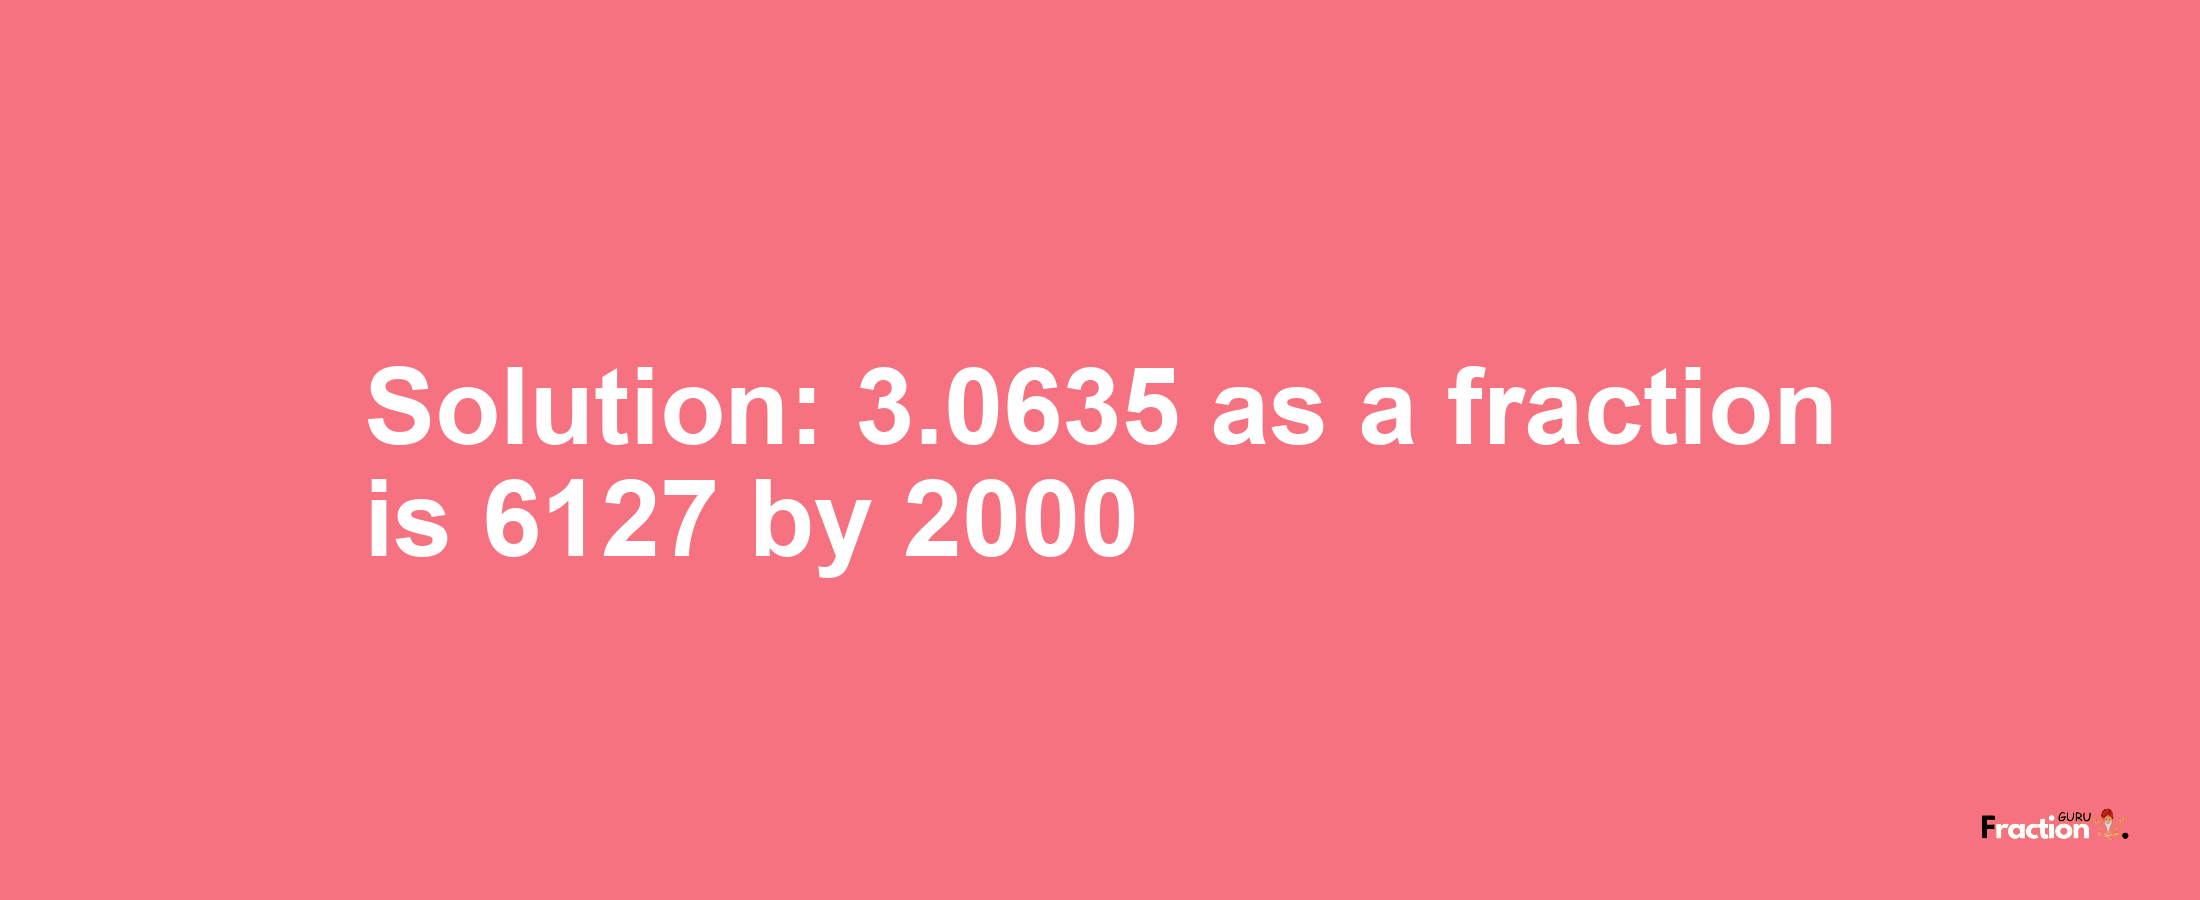 Solution:3.0635 as a fraction is 6127/2000